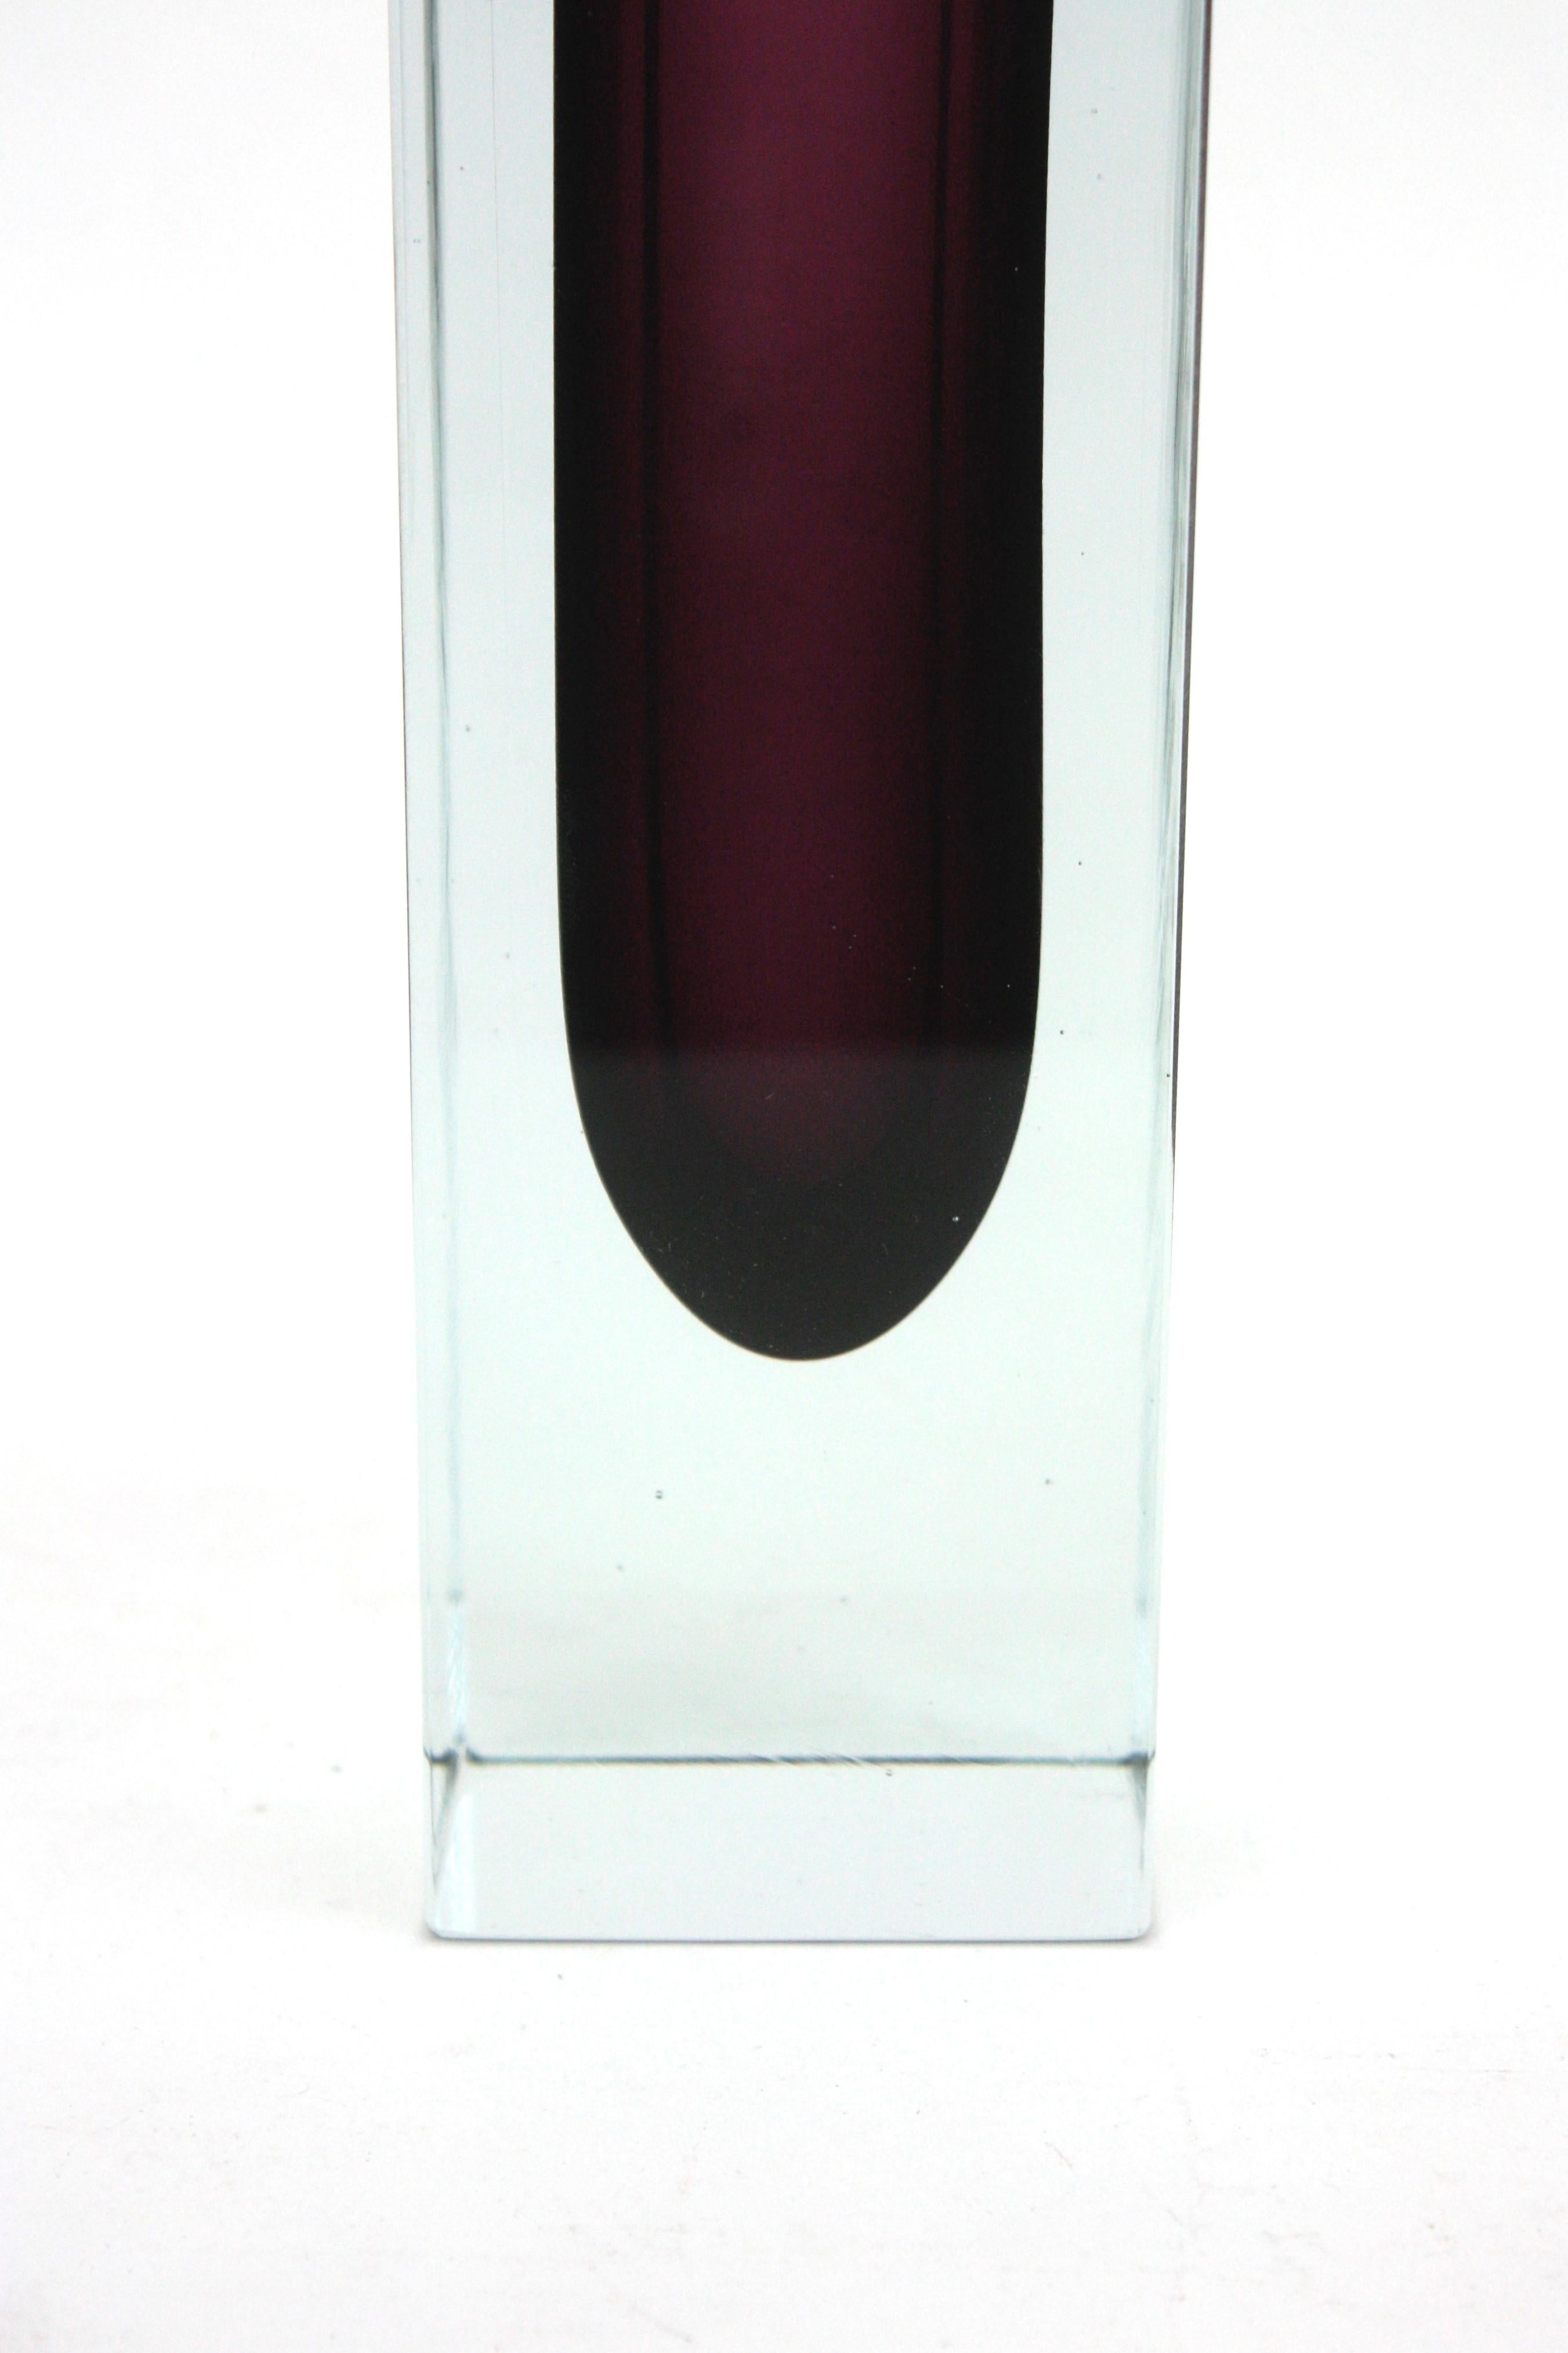 Giant Flavio Poli Murano Sommerso Purple Clear Faceted Art Glass Vase For Sale 2